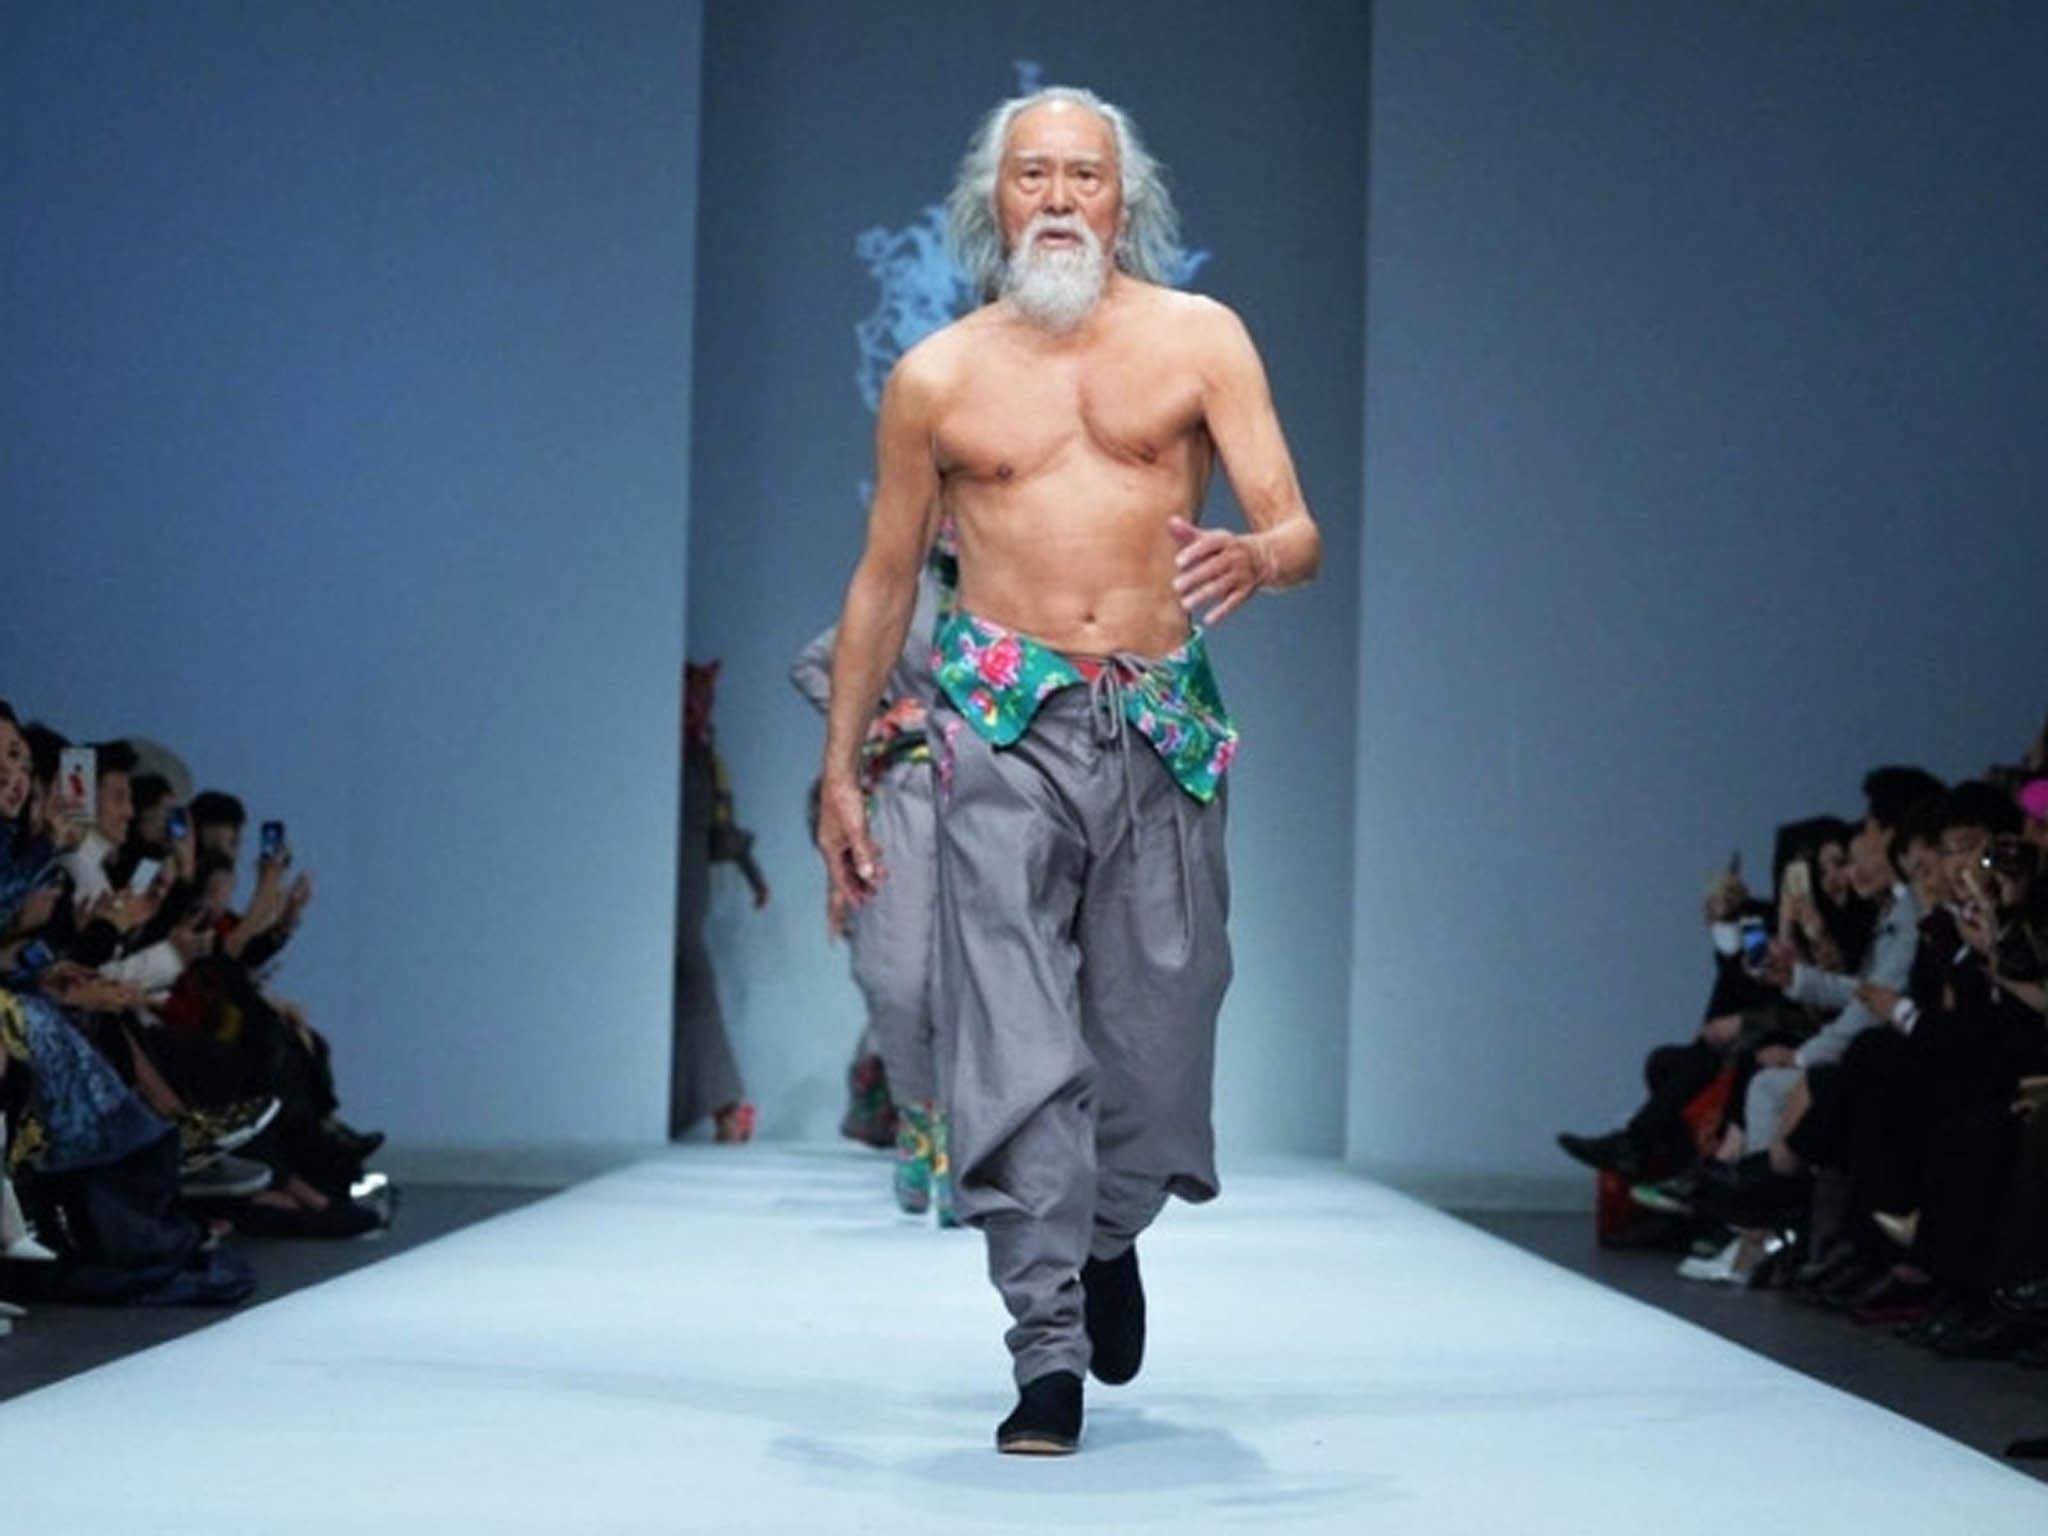 Wang Deshun made headlines when he appeared bare-chested on the runway in 2015